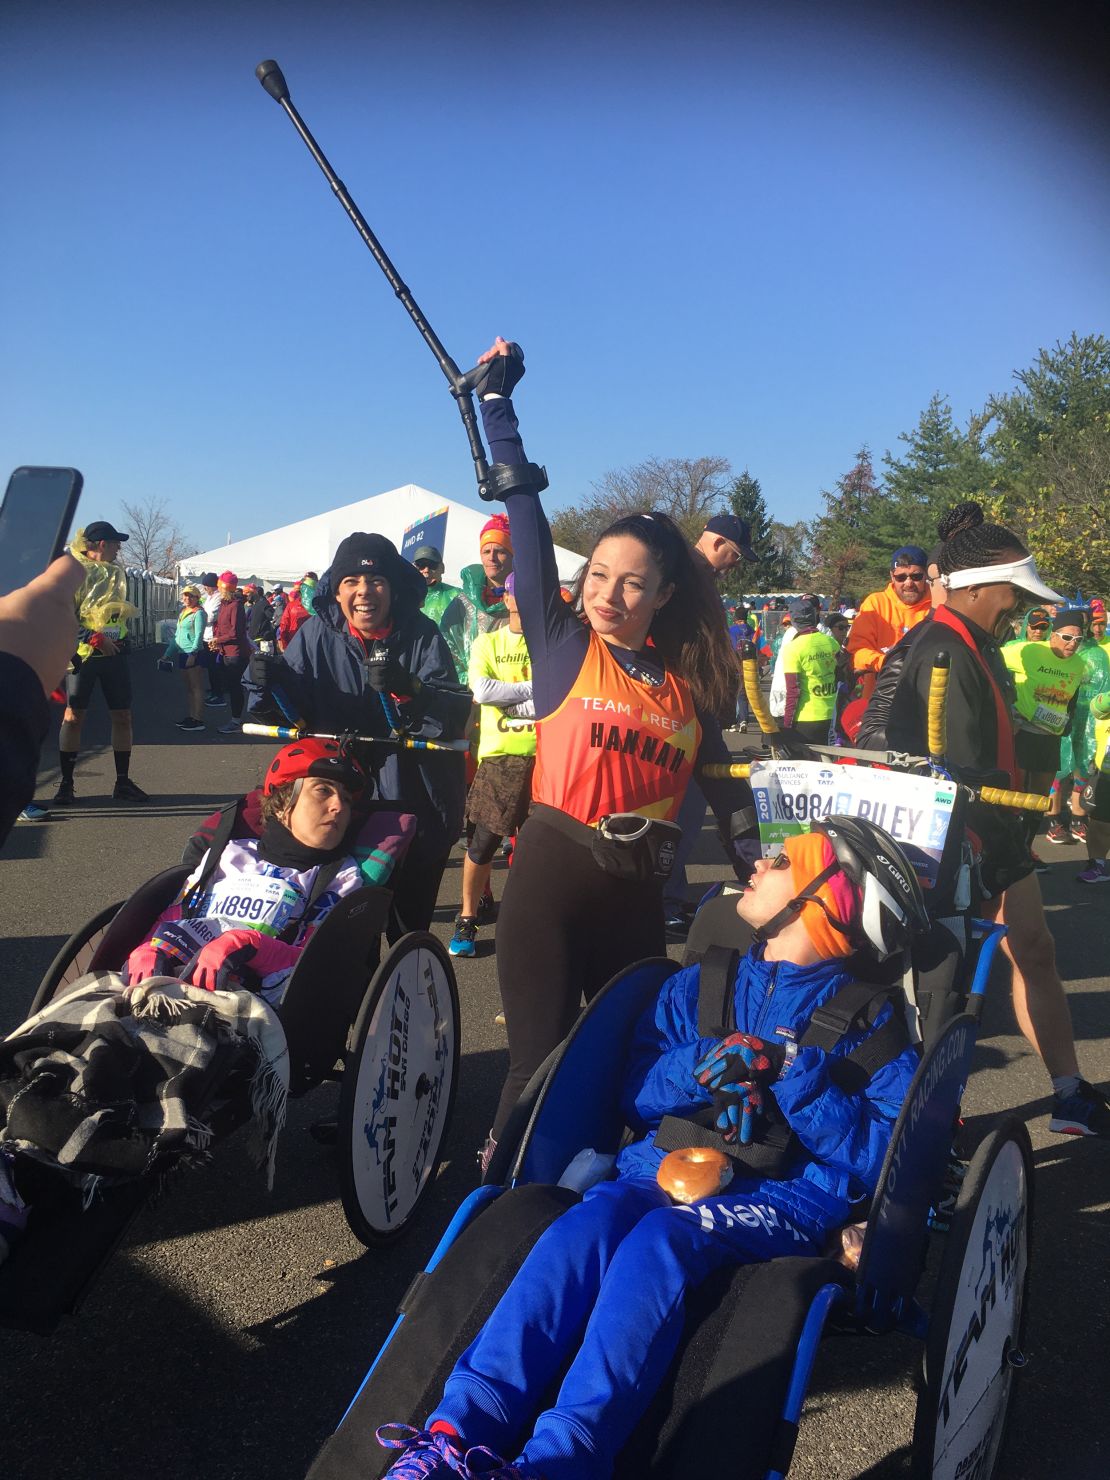 Hannah Gavios decided to participate in the New York City Marathon in 2018 after learning about Amanda Sullivan, who had previously completed marathons on crutches.